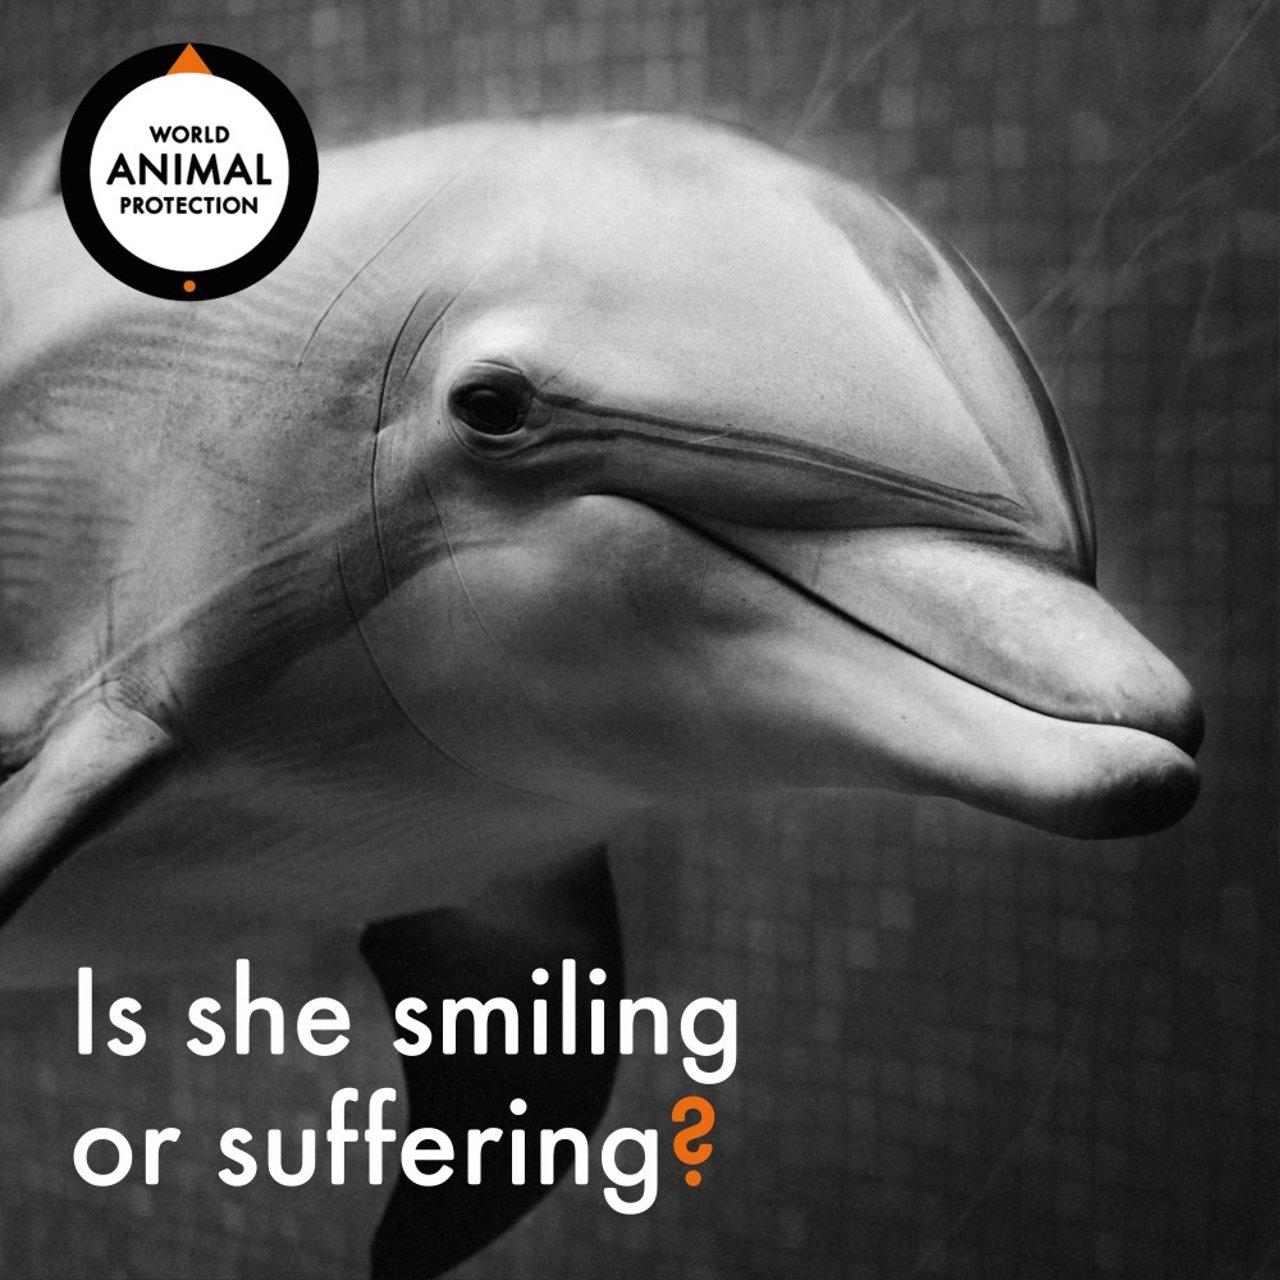 dolphin_suffering_or_smiling_p1